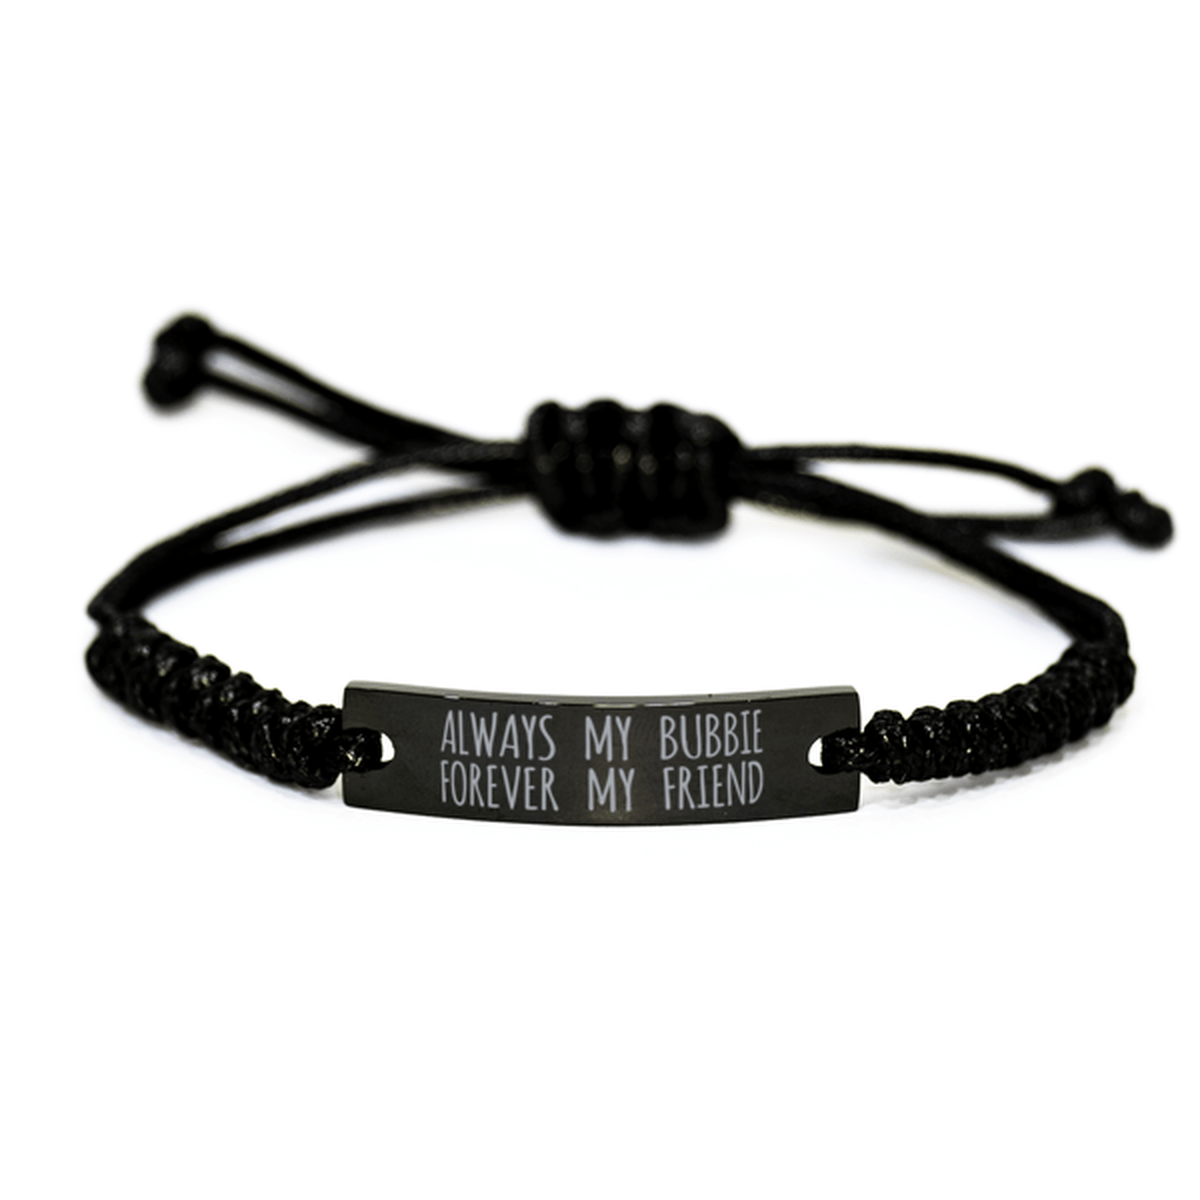 Inspirational Bubbie Black Rope Bracelet, Always My Bubbie Forever My Friend, Best Birthday Gifts For Family